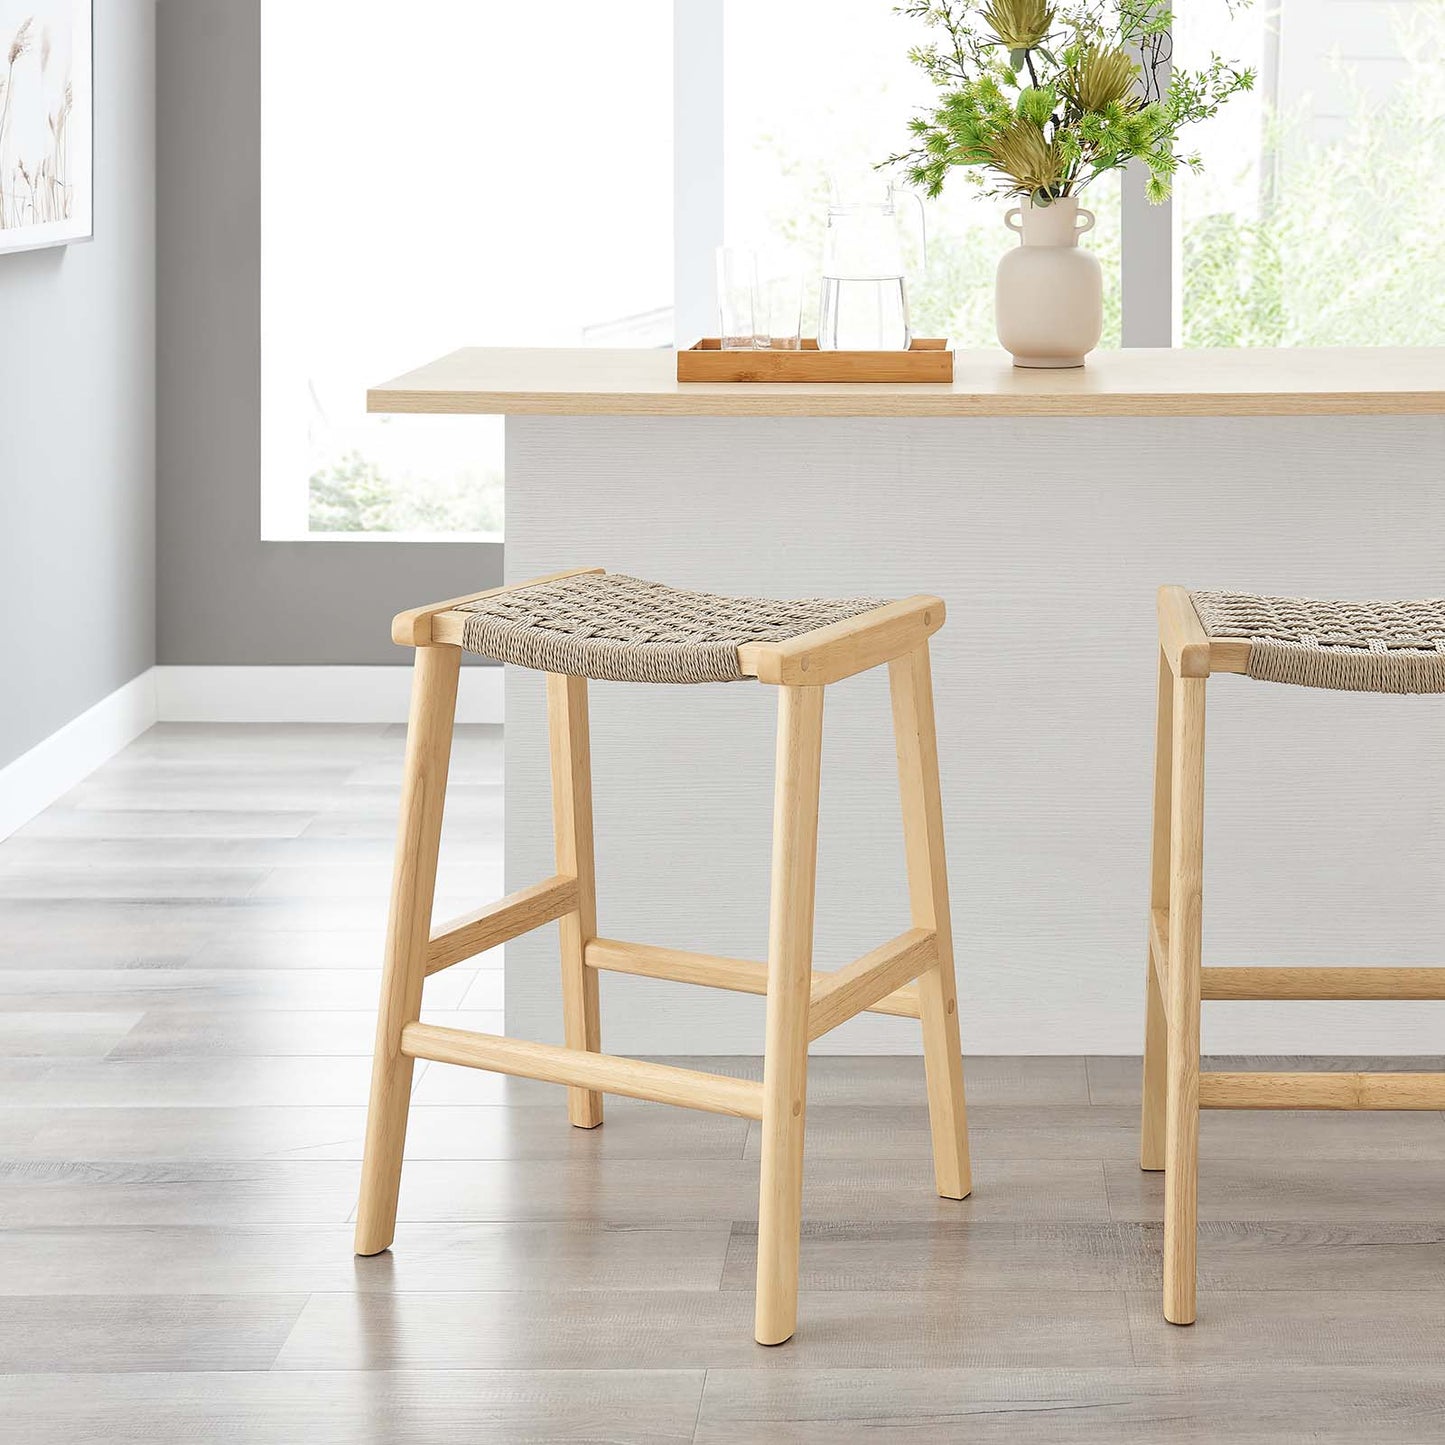 Saoirse Woven Rope Wood Counter Stool - Set of 2 By Modway - EEI-6548 | Counter Stools | Modway - 11